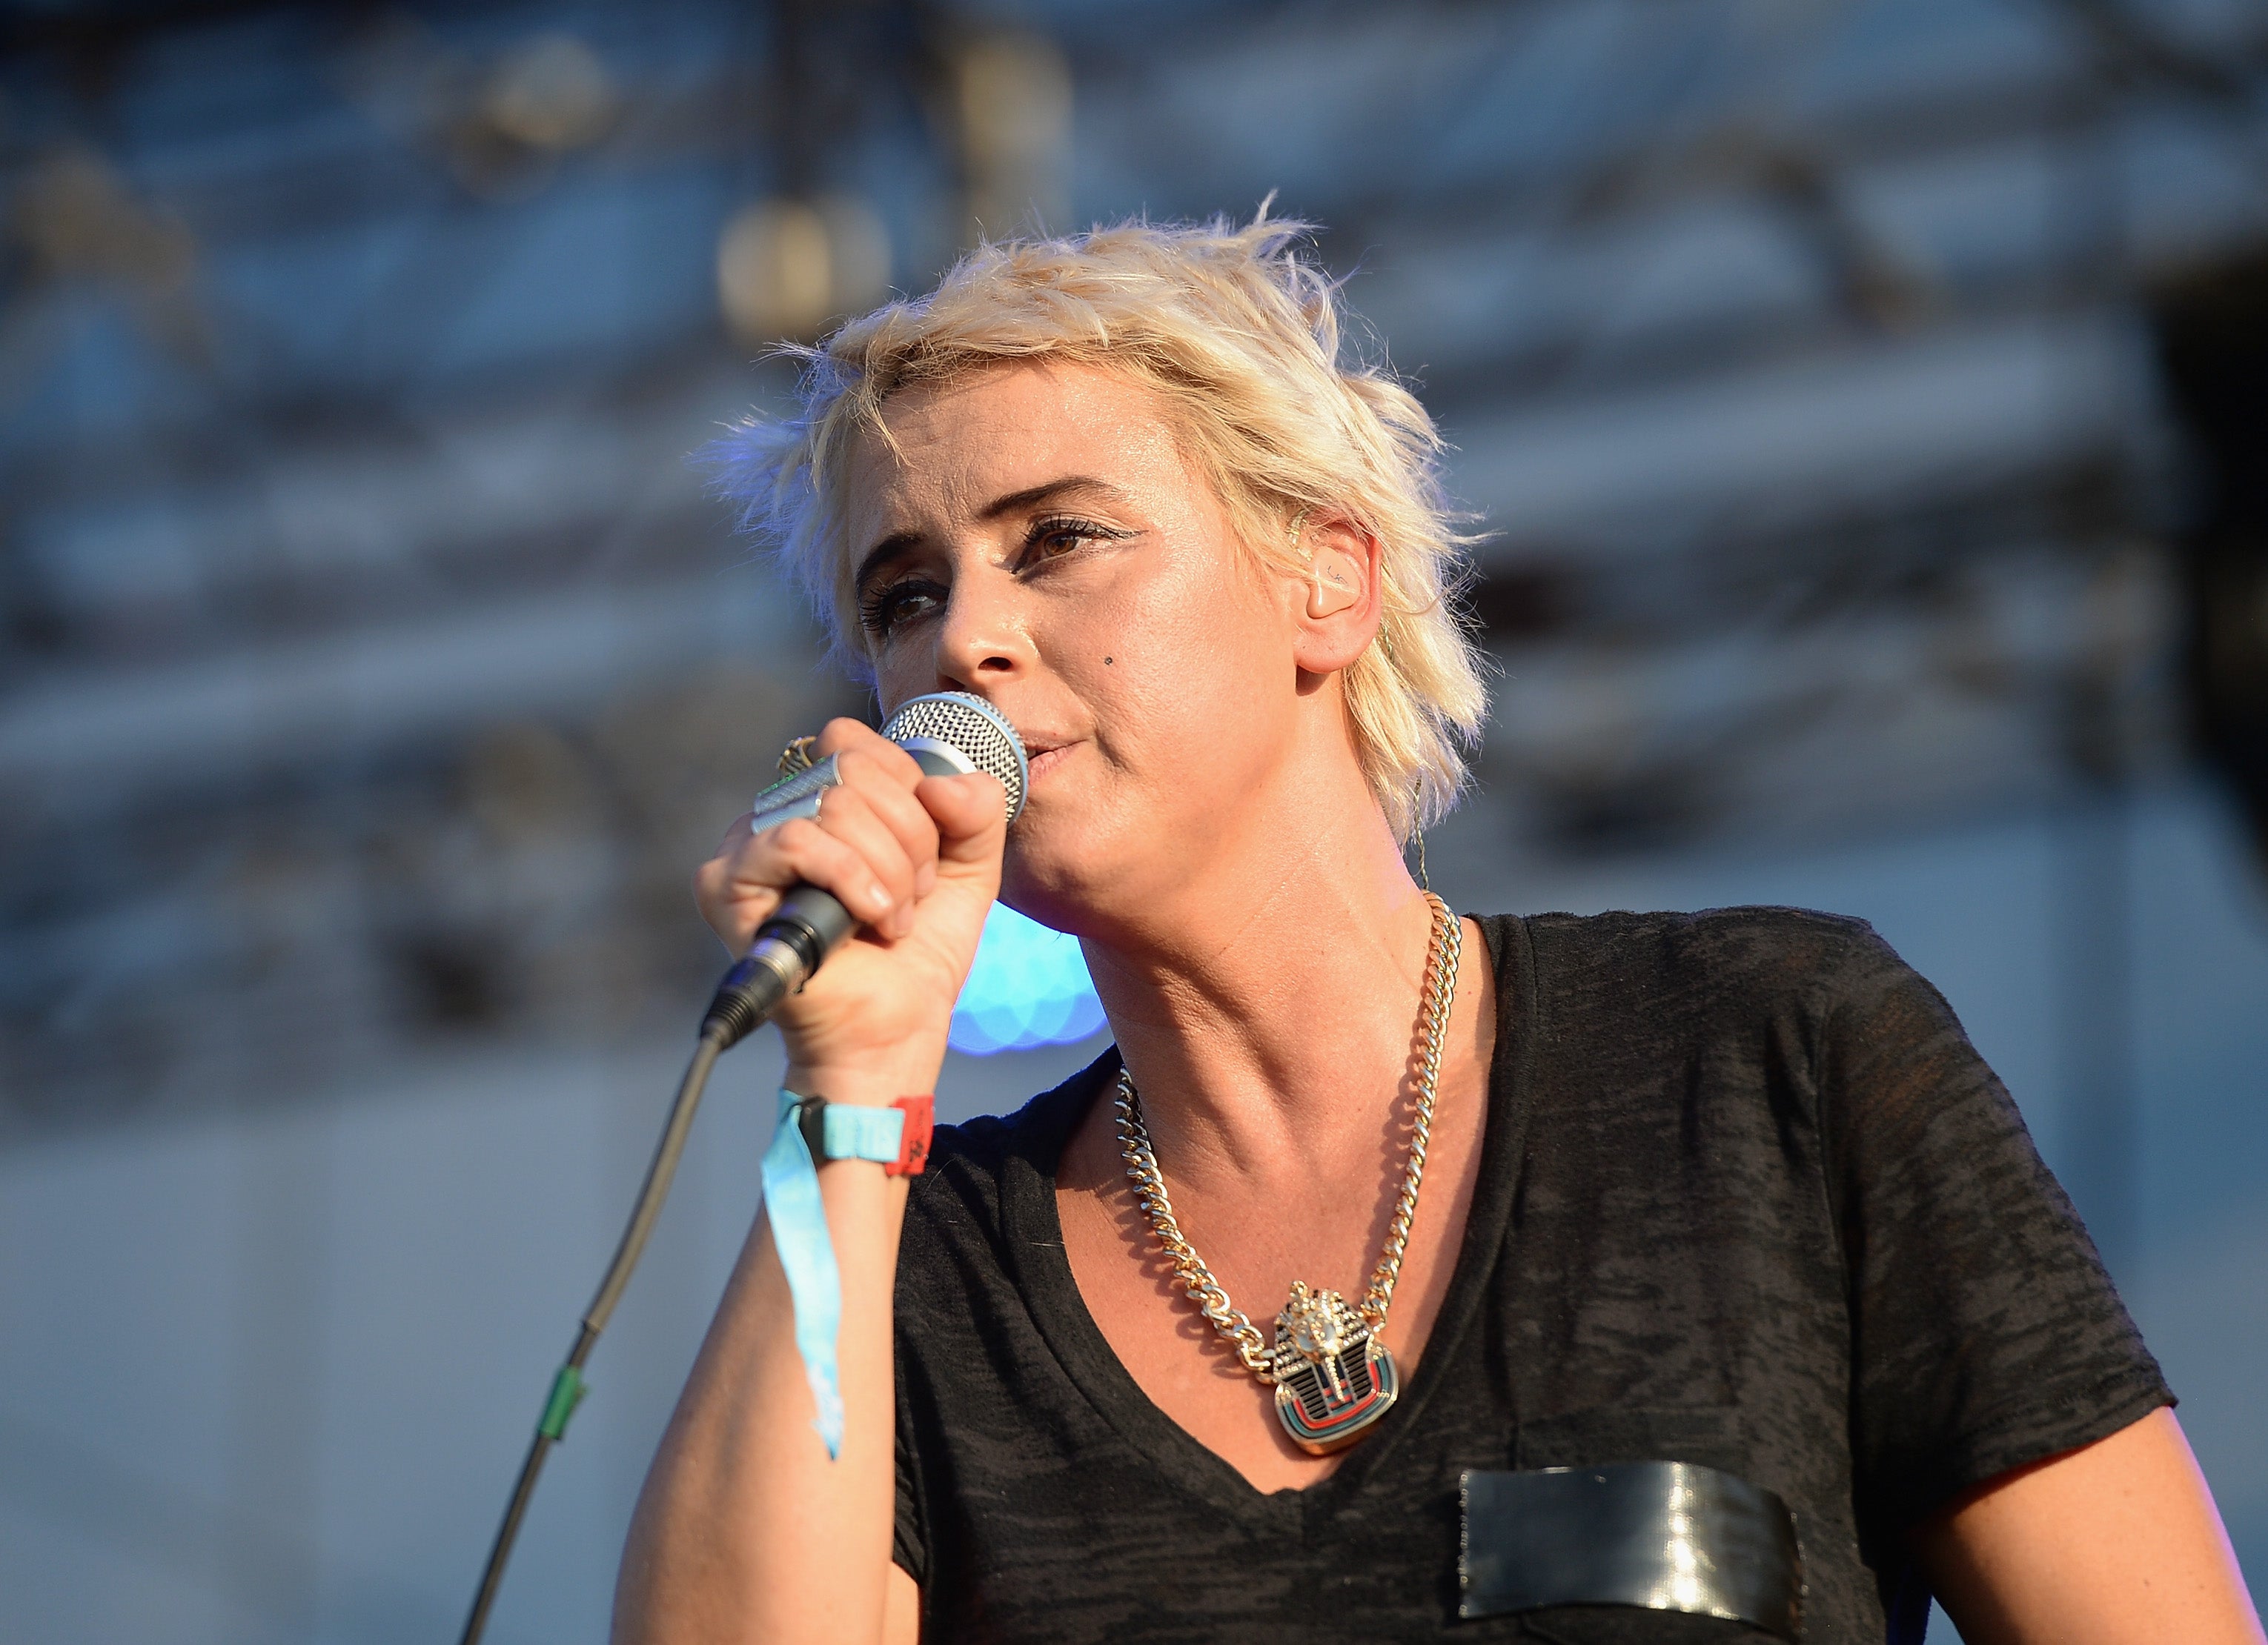 Cat Power performing at Bonnaroo Music and Arts Festival in 2013